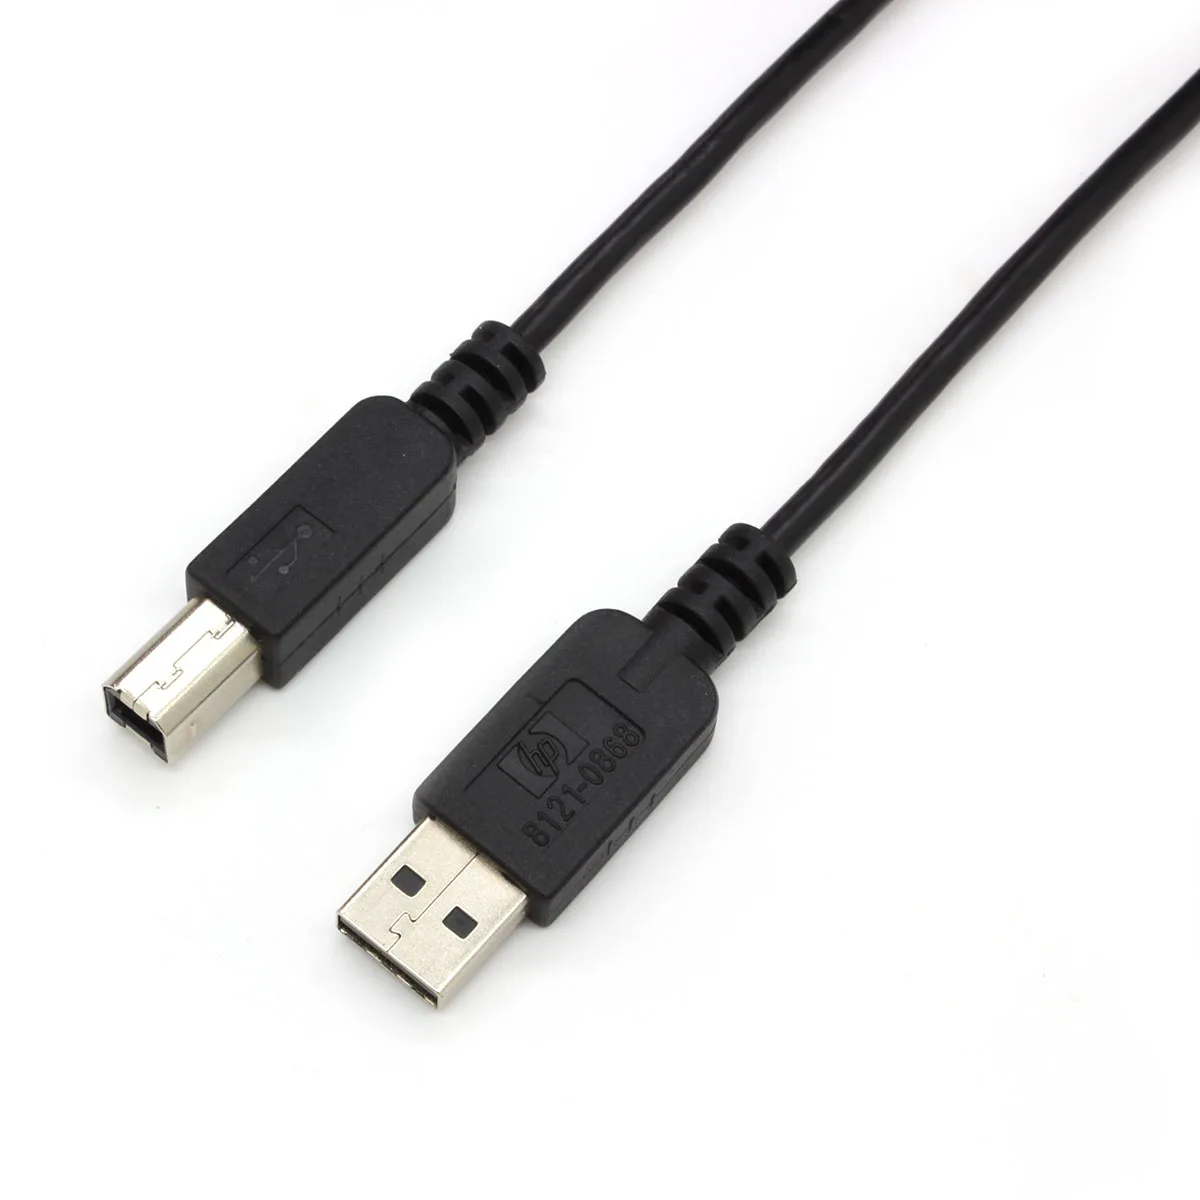 Wholesale Price High Speed 1.5m Black Am/bm Usb 2.0 Printer Cable Usb2.0  Type A To Type B Cable Support Audio Interface Monitor - Buy Usb2.0 Printer  Cable,Usb Am/bm Cable,Usb2.0 Type A To